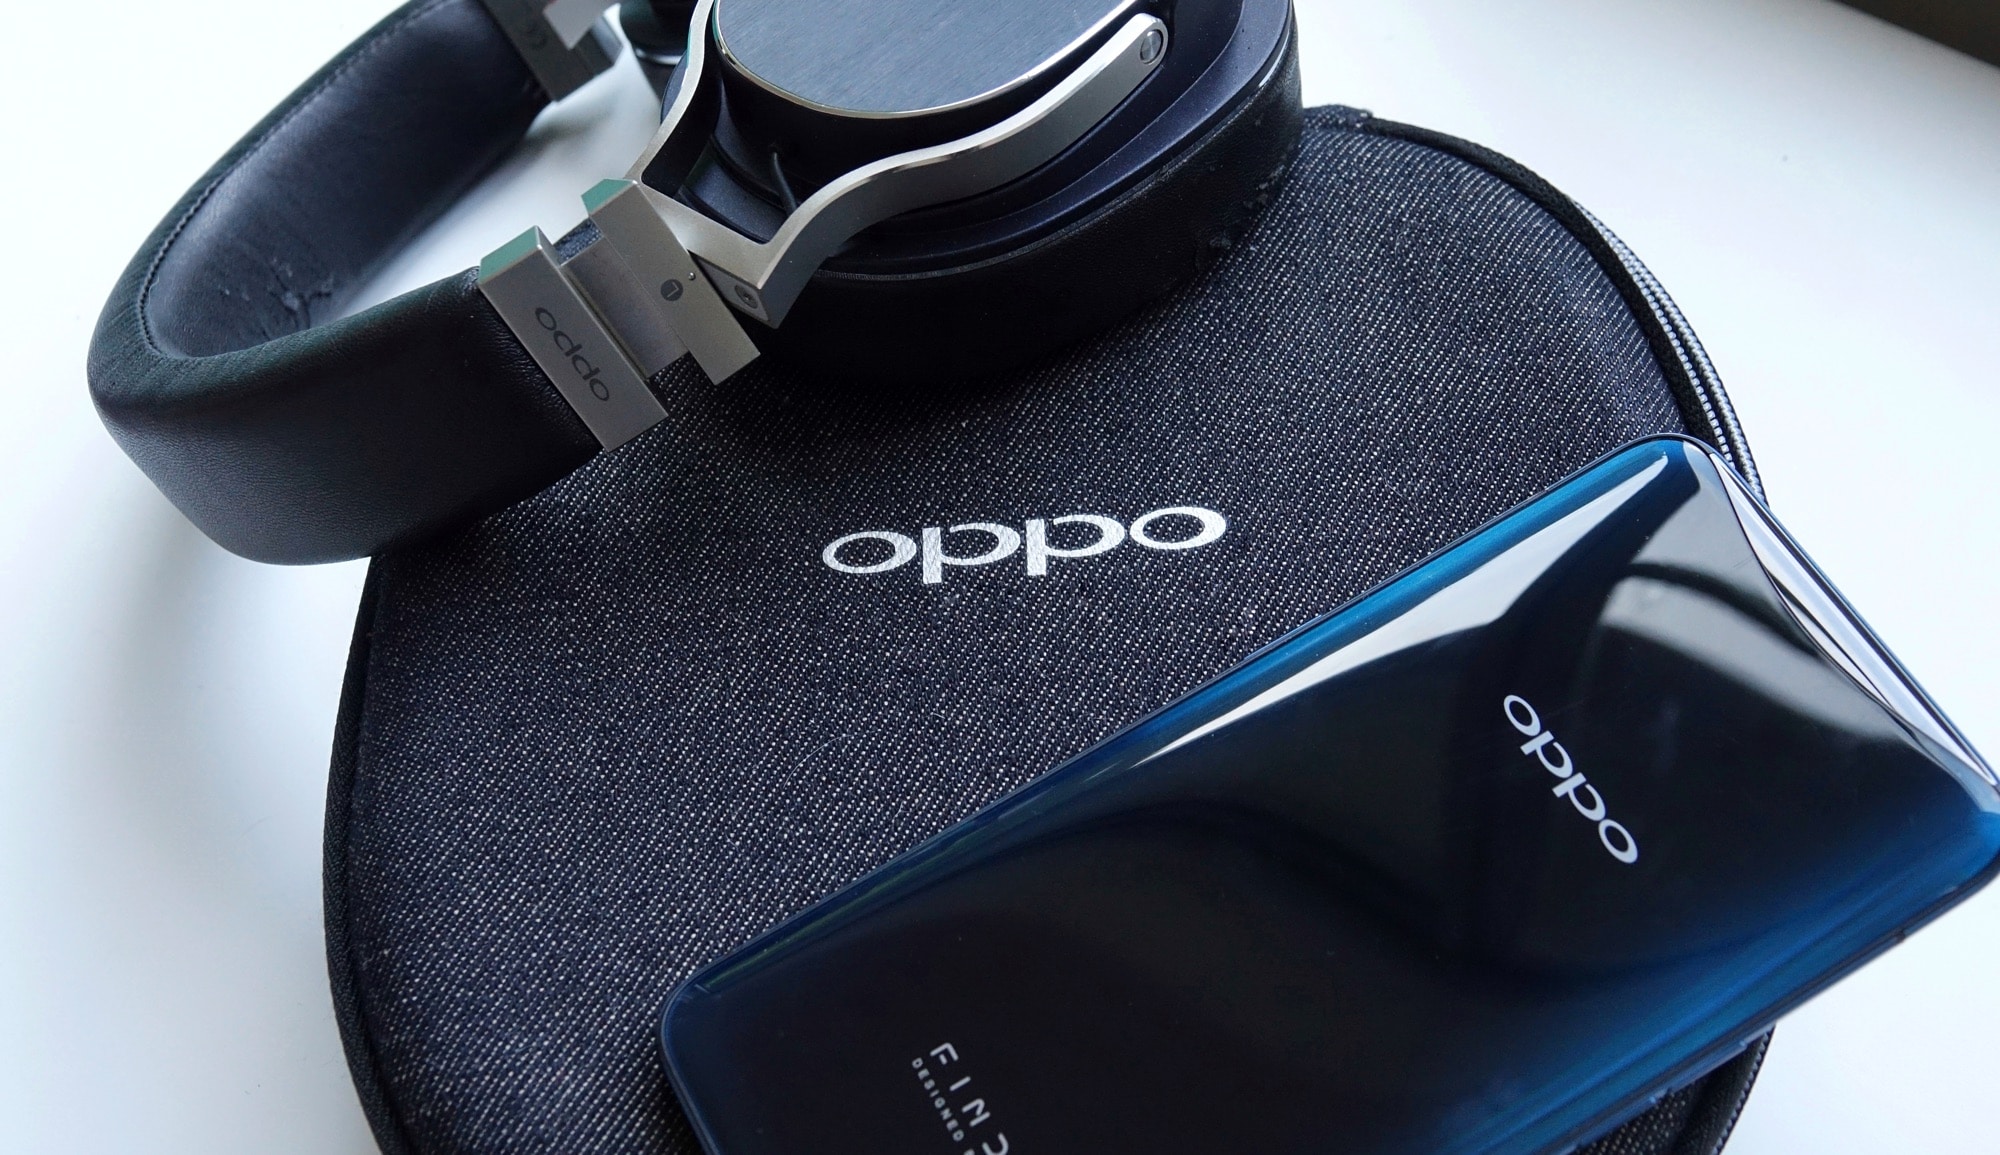 Old Oppo Digital headphones next to the Oppo Find X